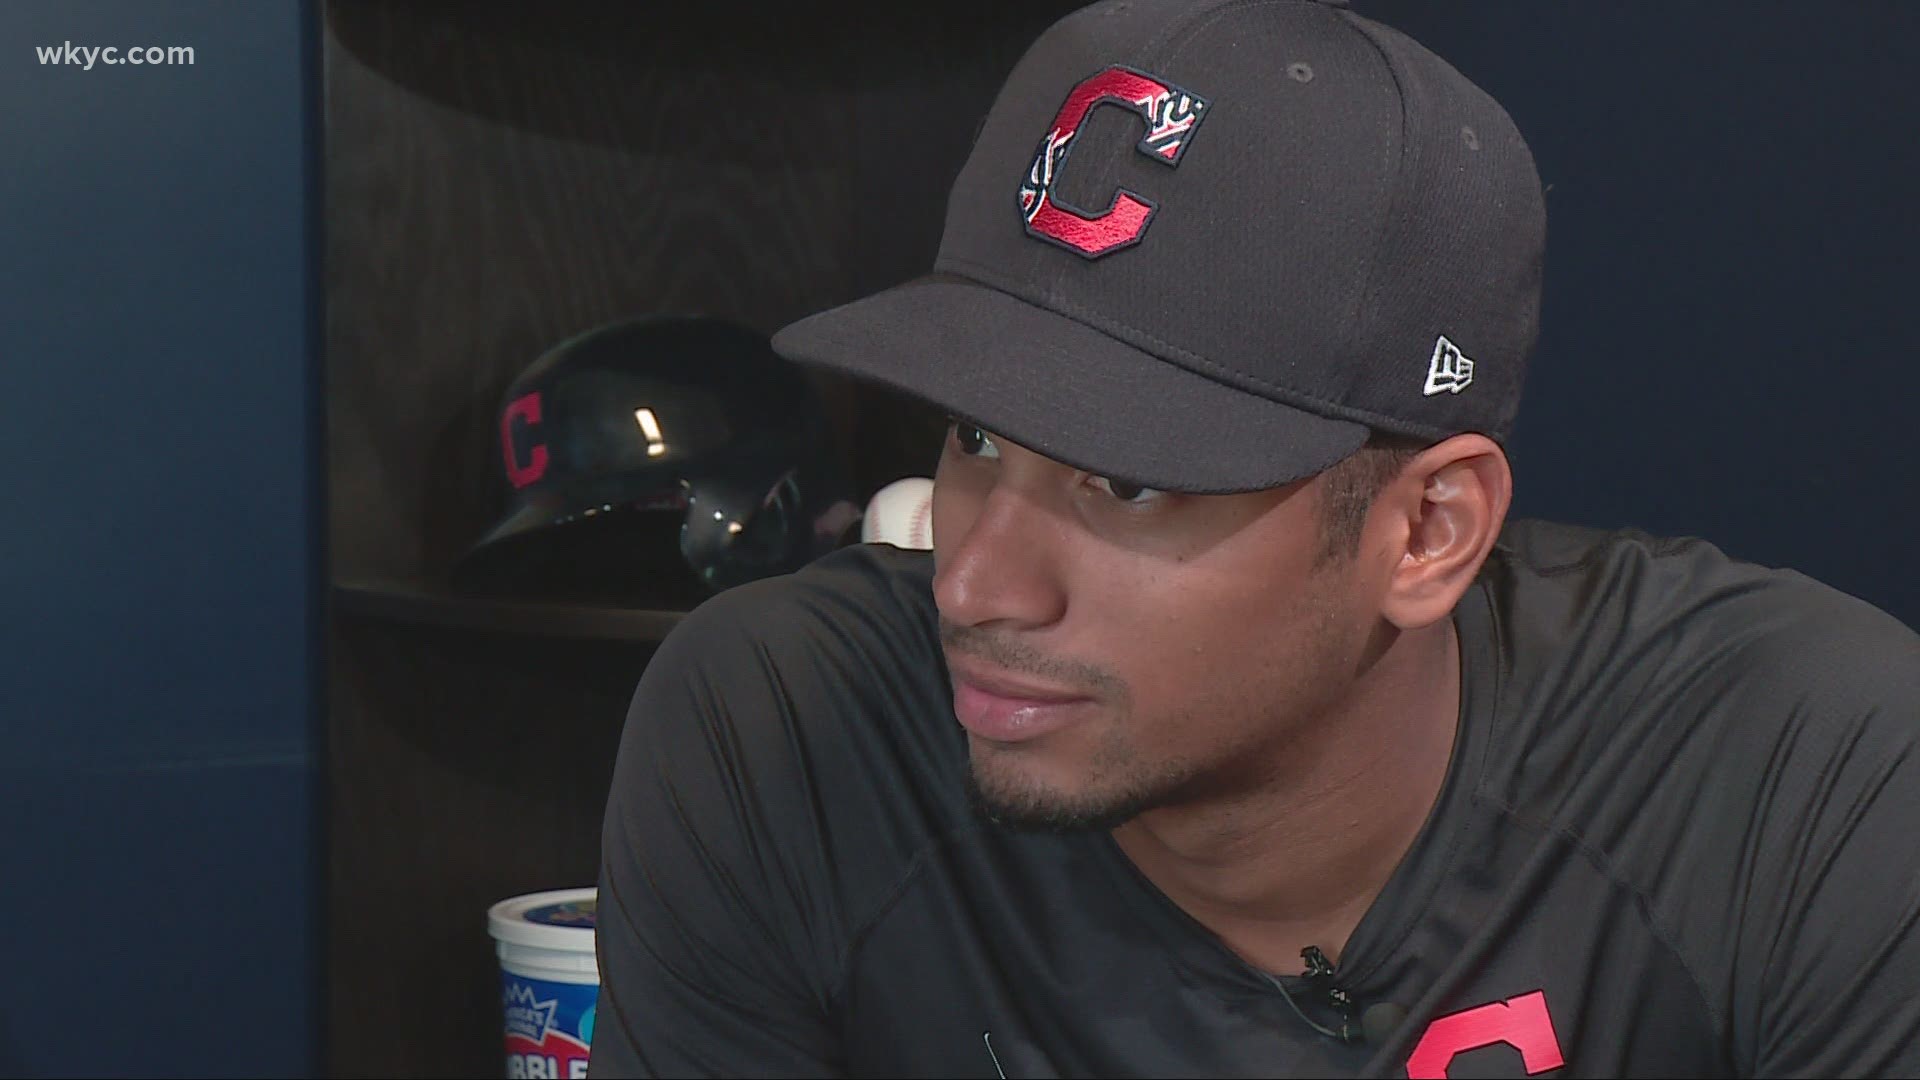 Sept. 14, 2020: We hit Oscar Mercado of the Cleveland Indians with rapid-fire questions. It's all for the latest edition of 'Beyond the Dugout' with Dave Chudowsky.